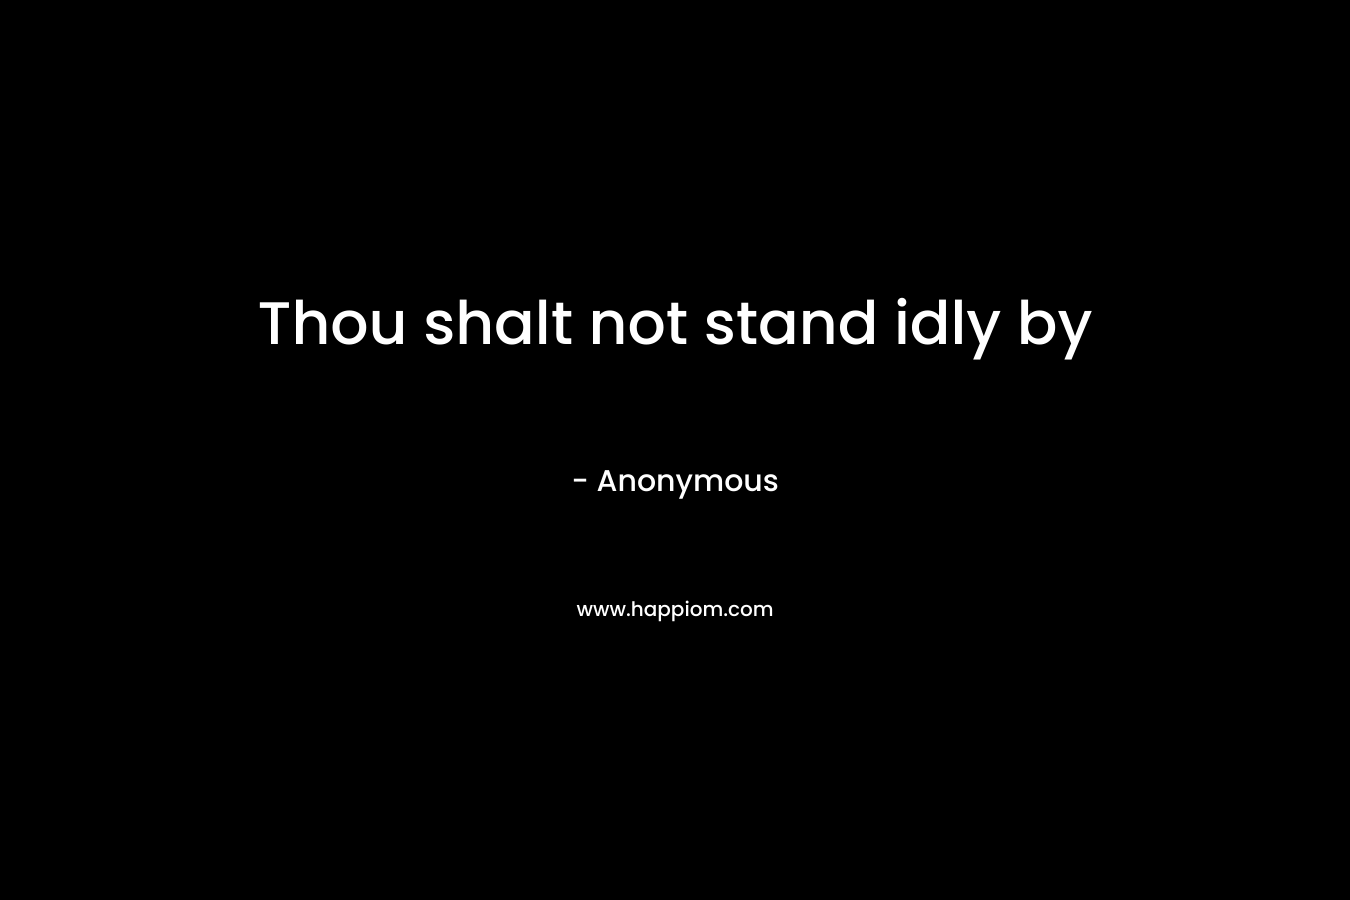 Thou shalt not stand idly by